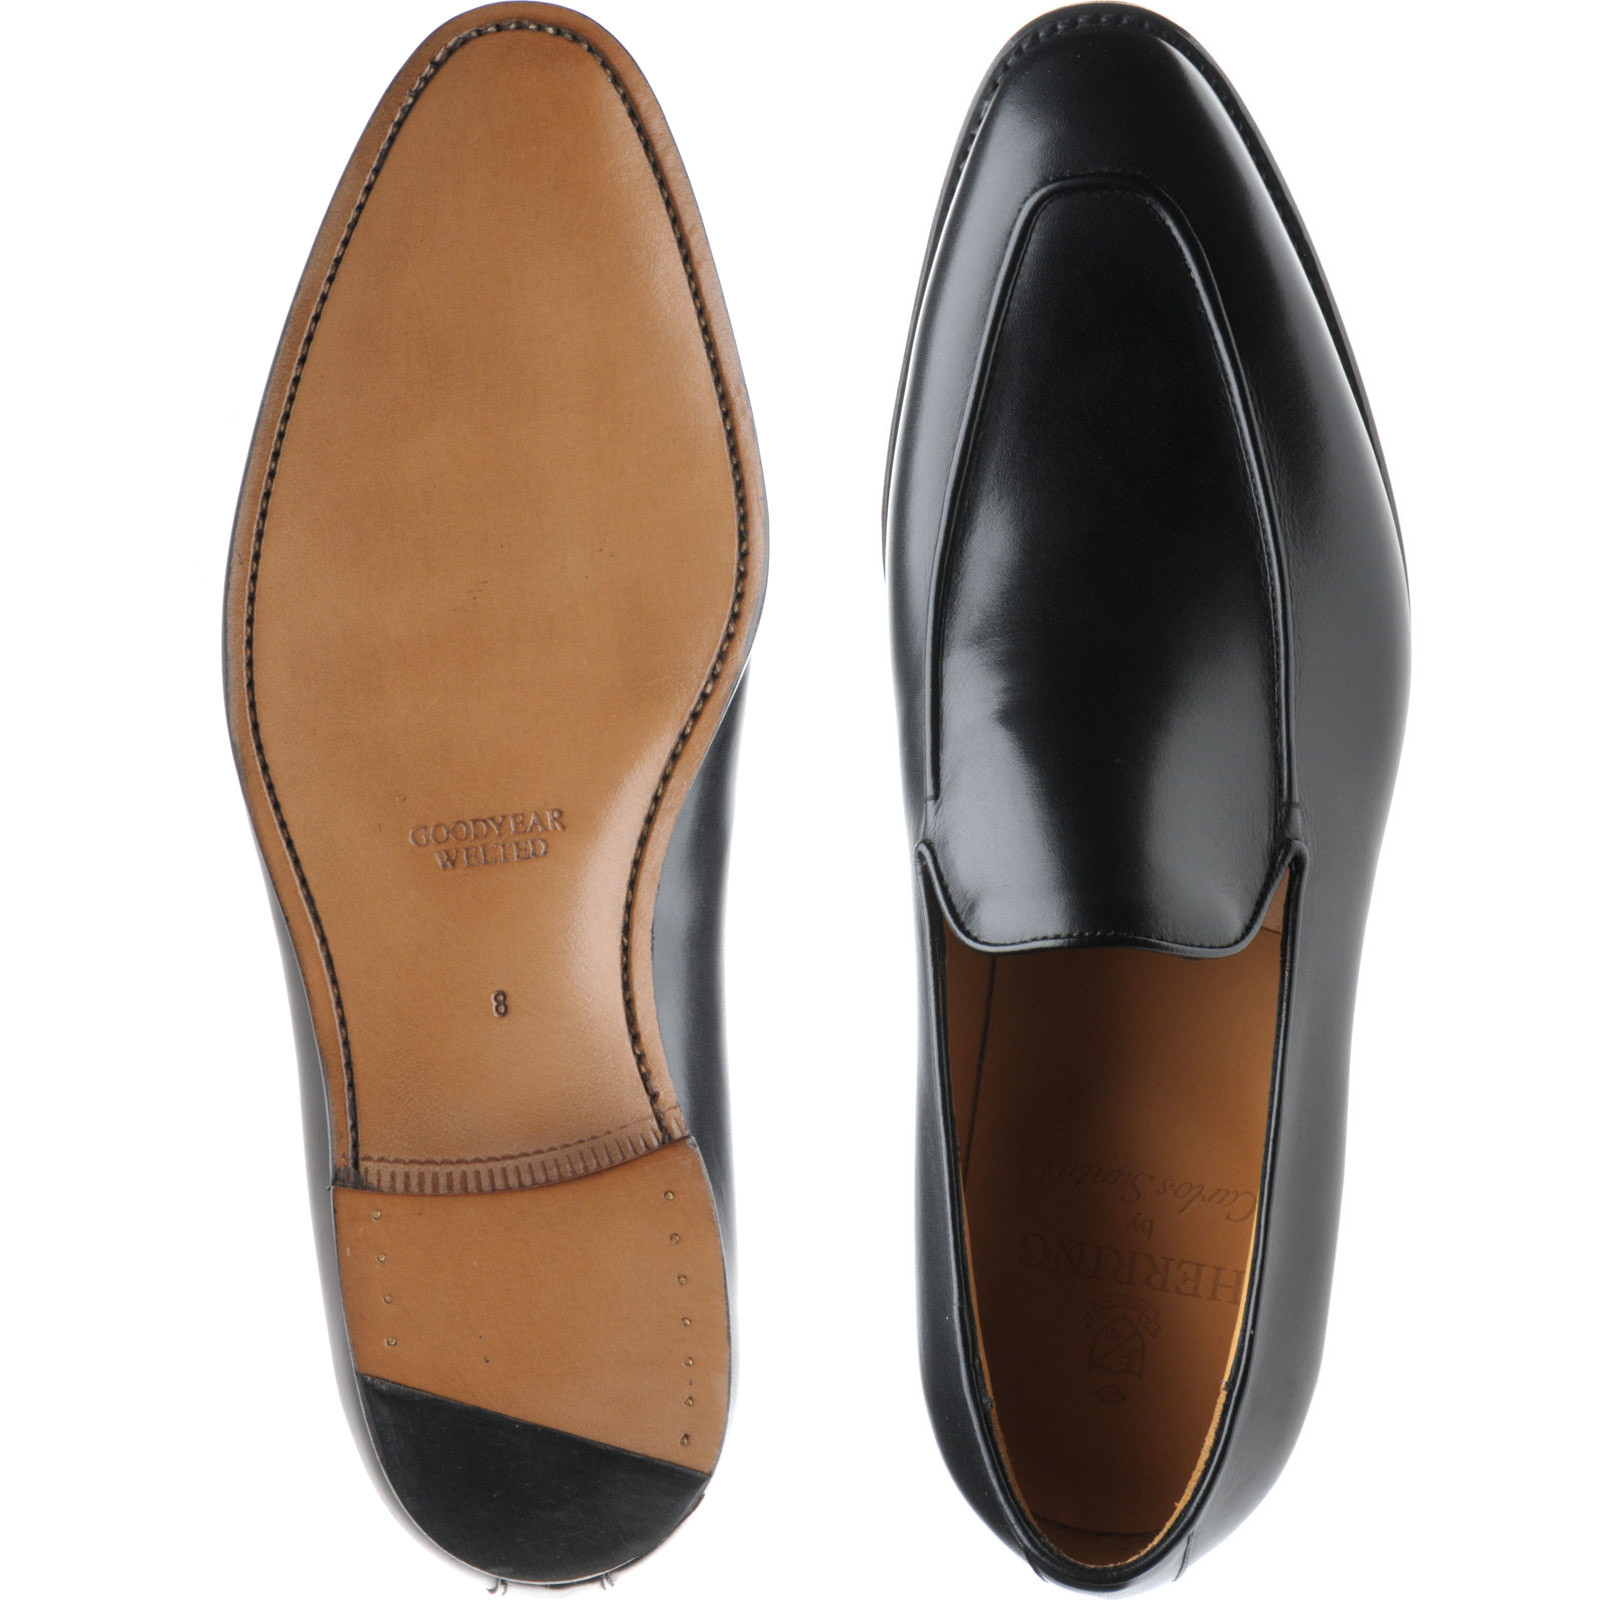 Herring shoes | Herring Classic | Fleming loafers in Black Calf at ...